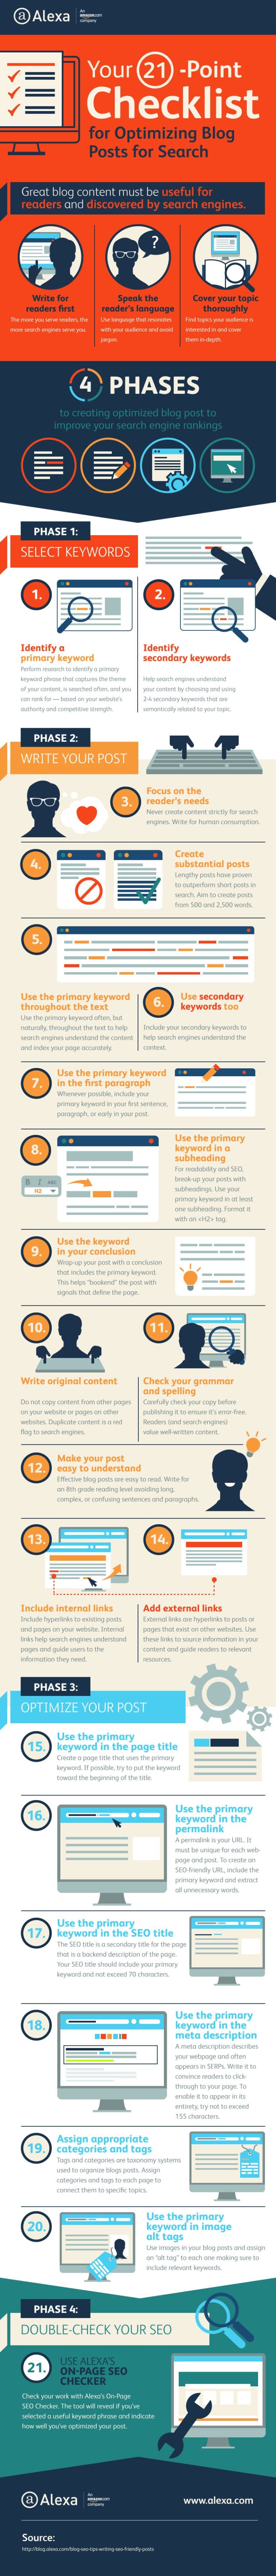 21-Point Checklist to Boost Your Blog Posts in Search - #Infographic